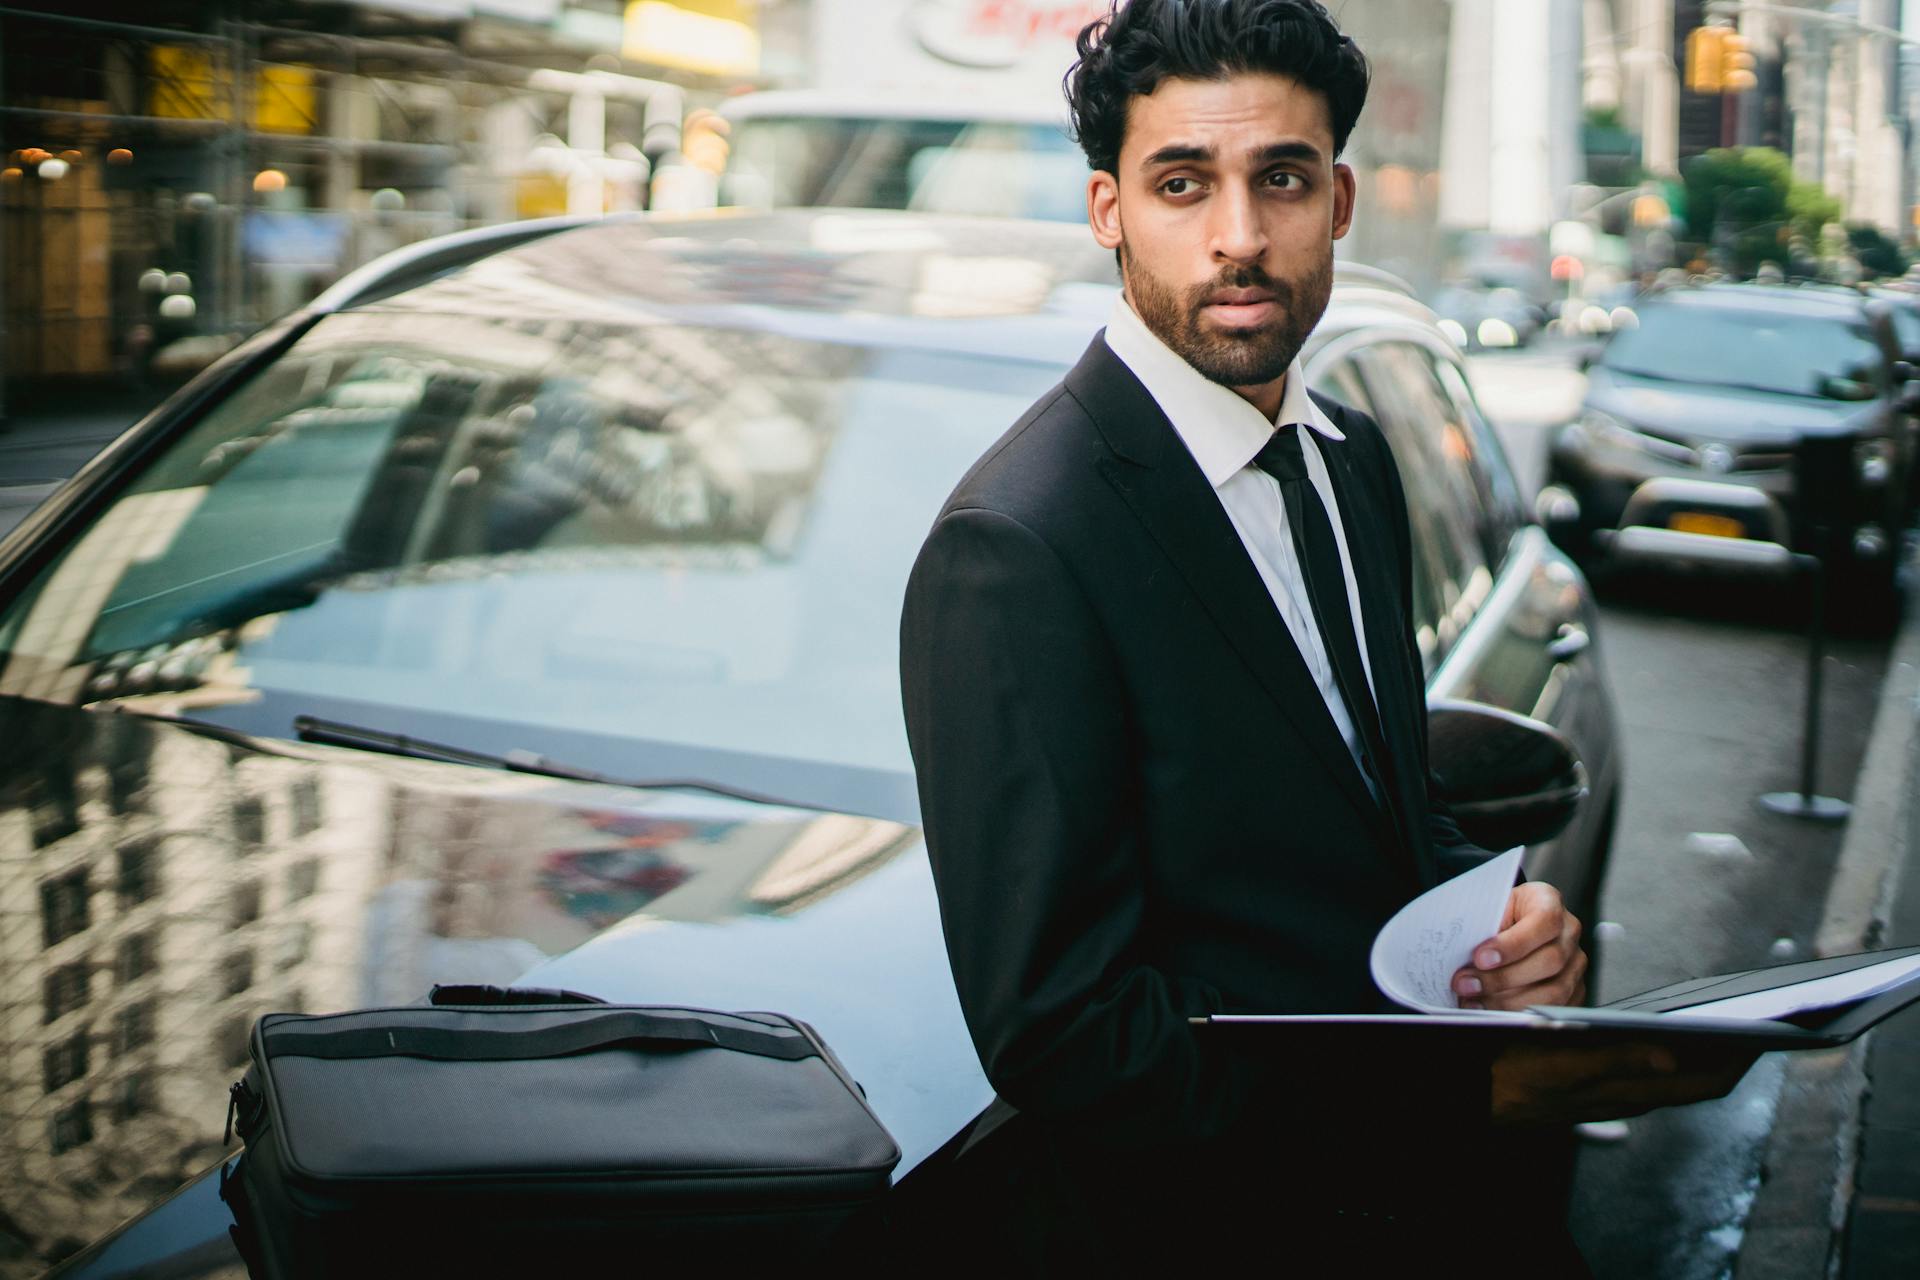 A young man leaning on a car | Source: Pexels